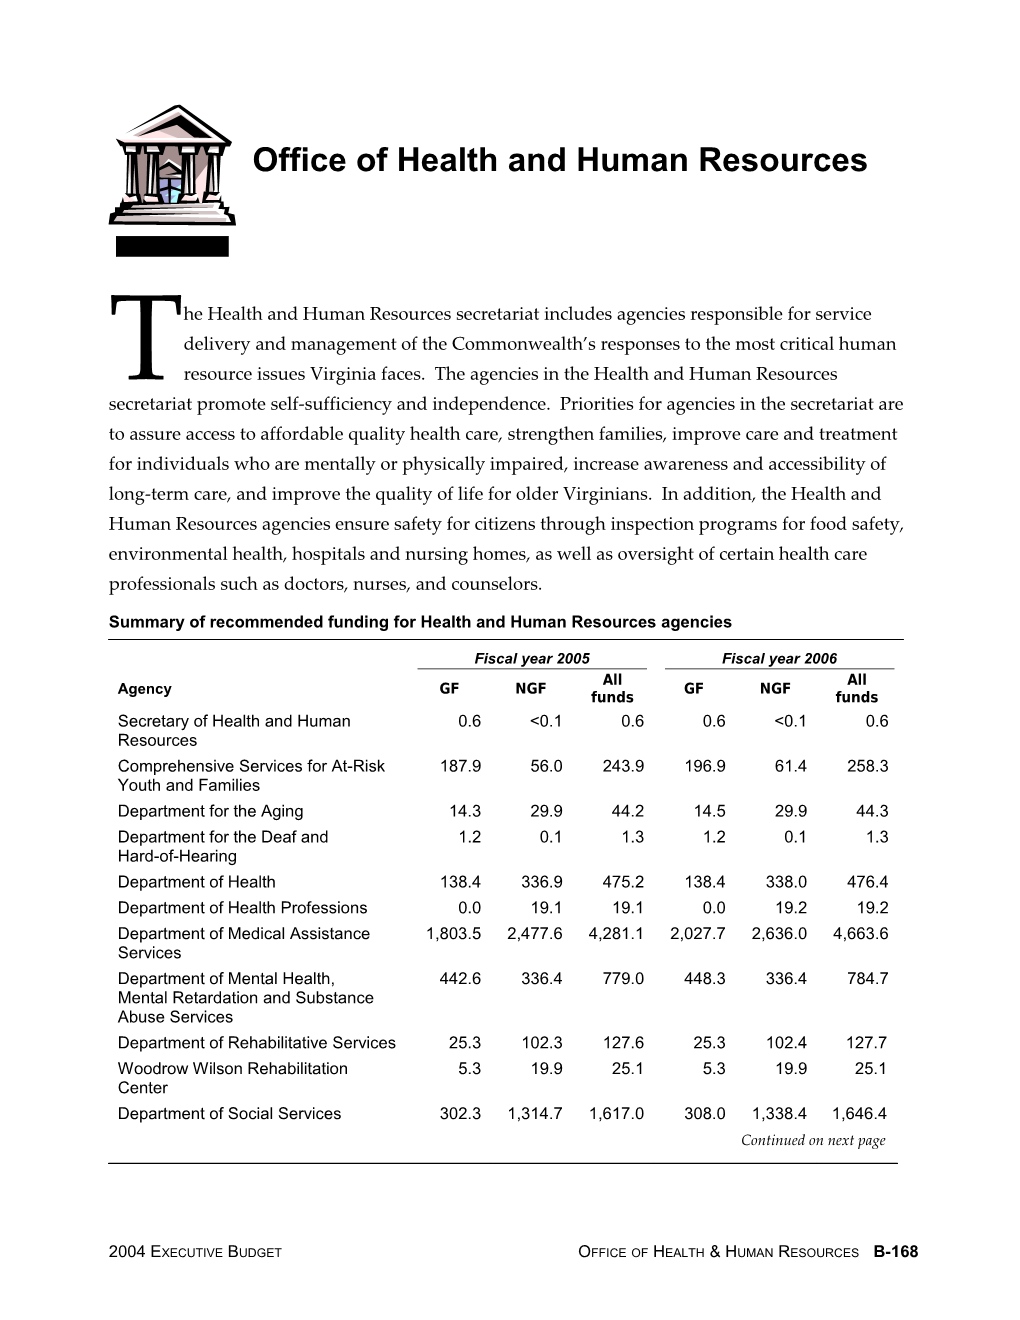 Summary of Recommended Funding for Health and Human Resources Agencies